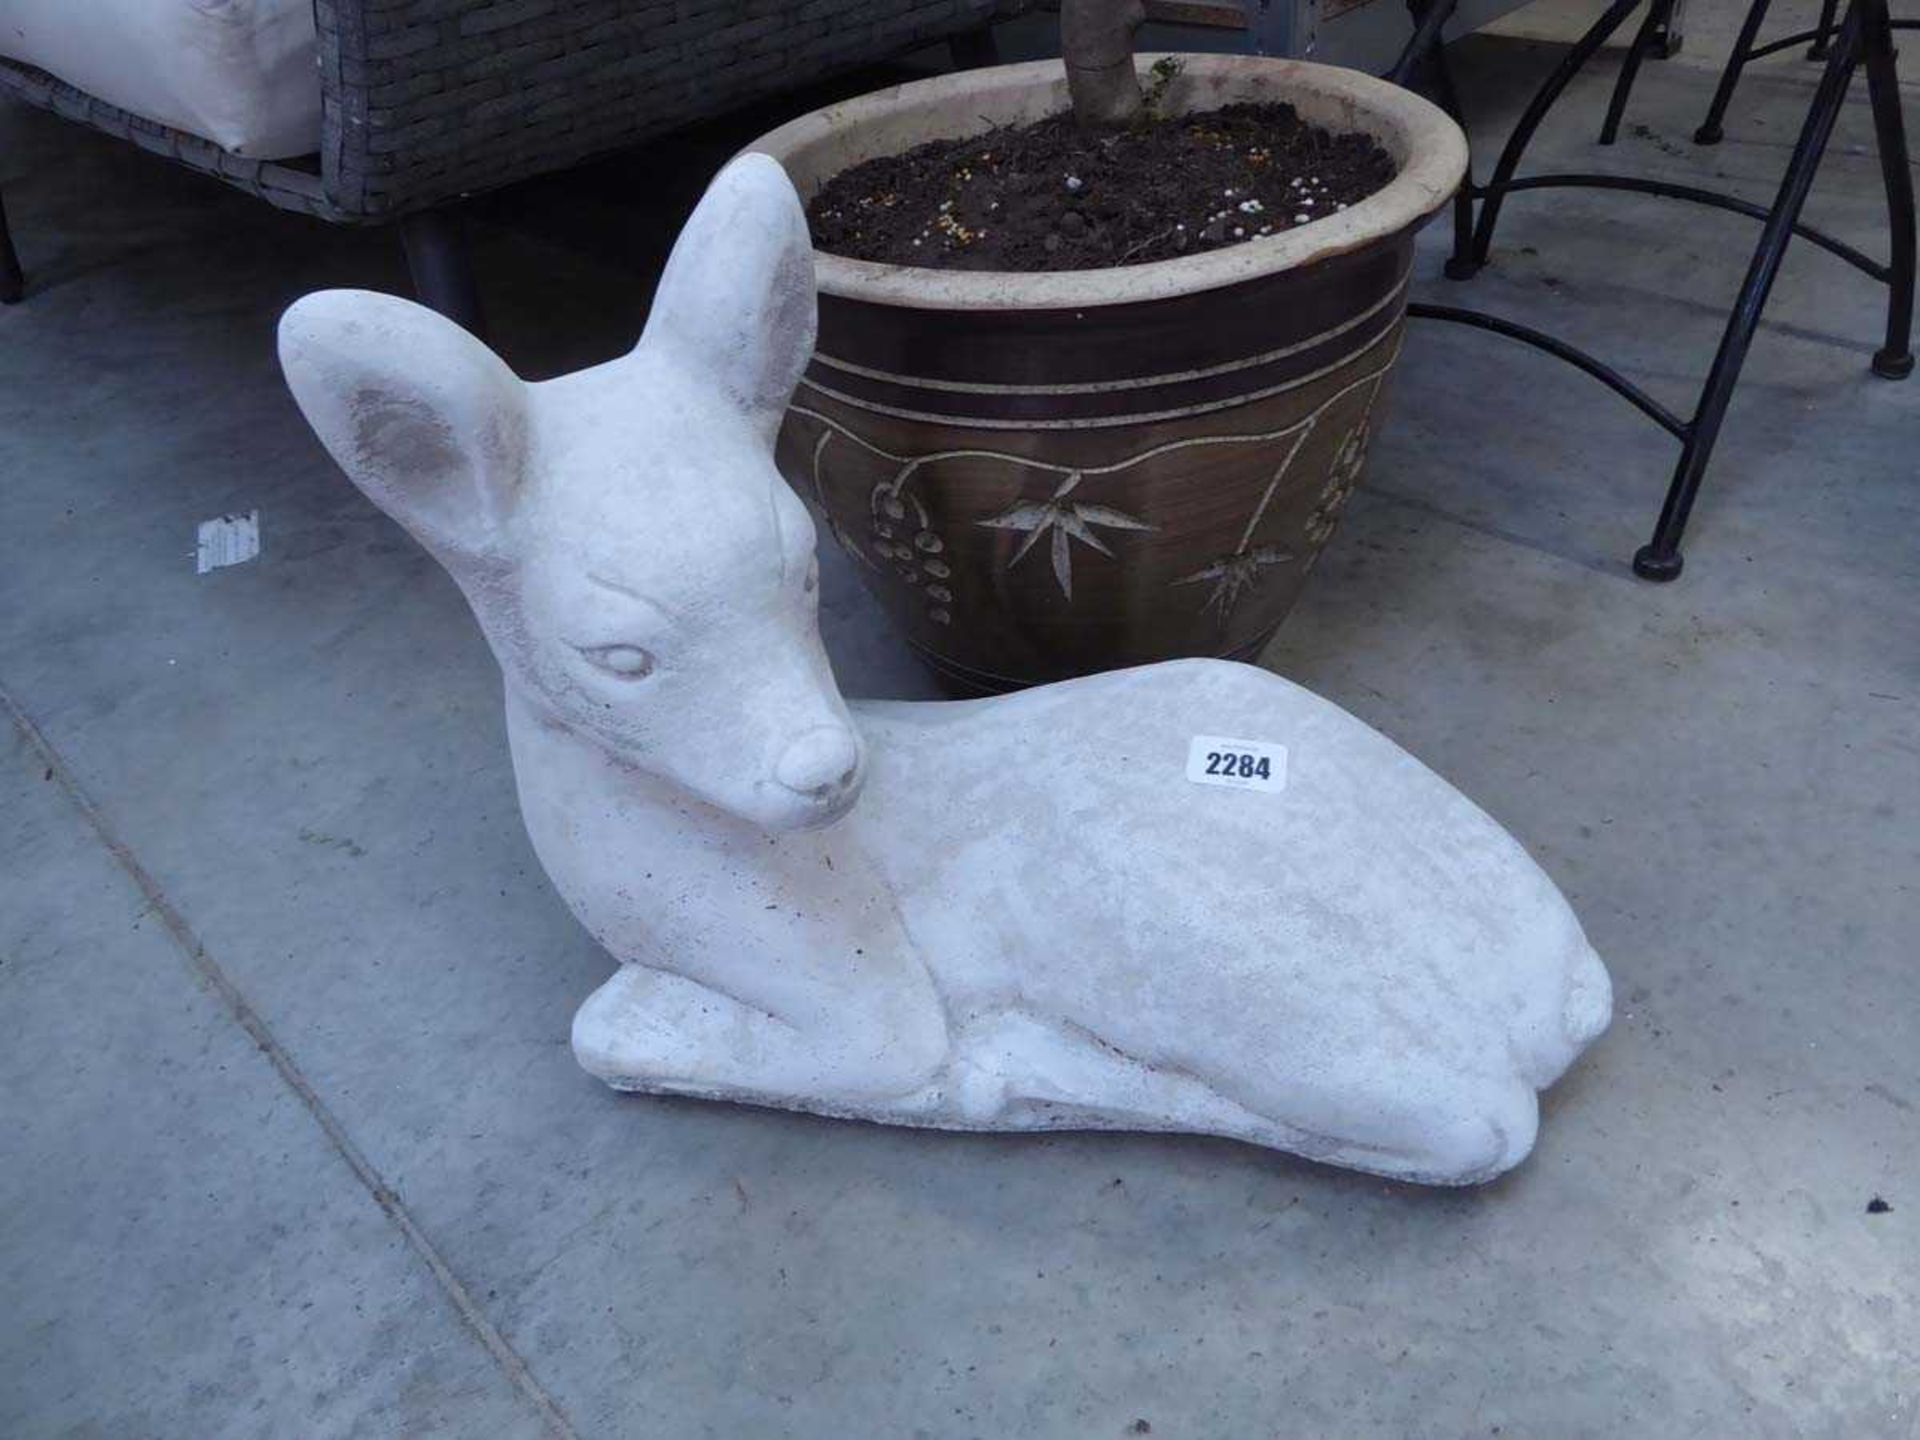 Concrete deer laying down